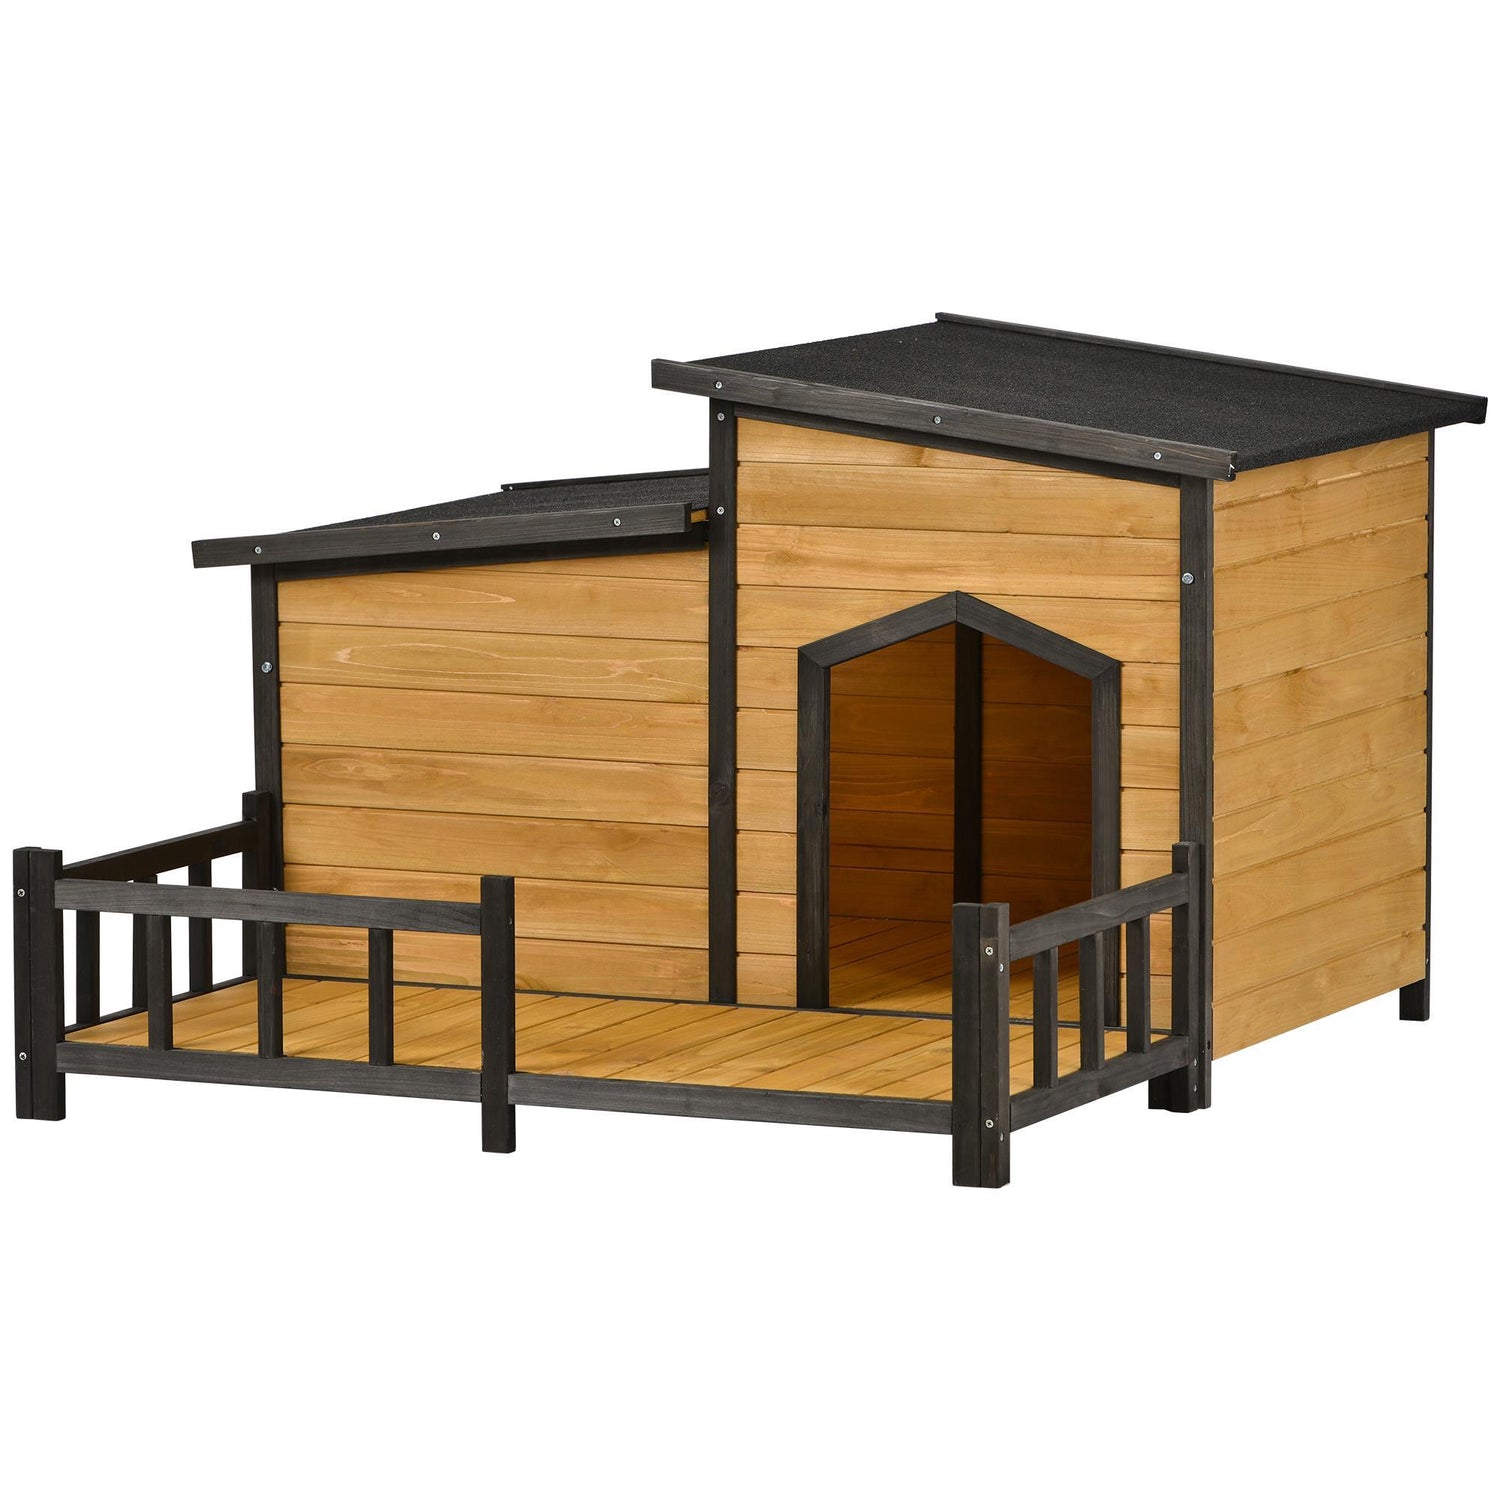 Baytocare 47.2" Large Wooden Dog House Outdoor, Indoor Dog Crate, Cabin Style, with Porch Animals & Pet Supplies > Pet Supplies > Dog Supplies > Dog Houses KOL PET   